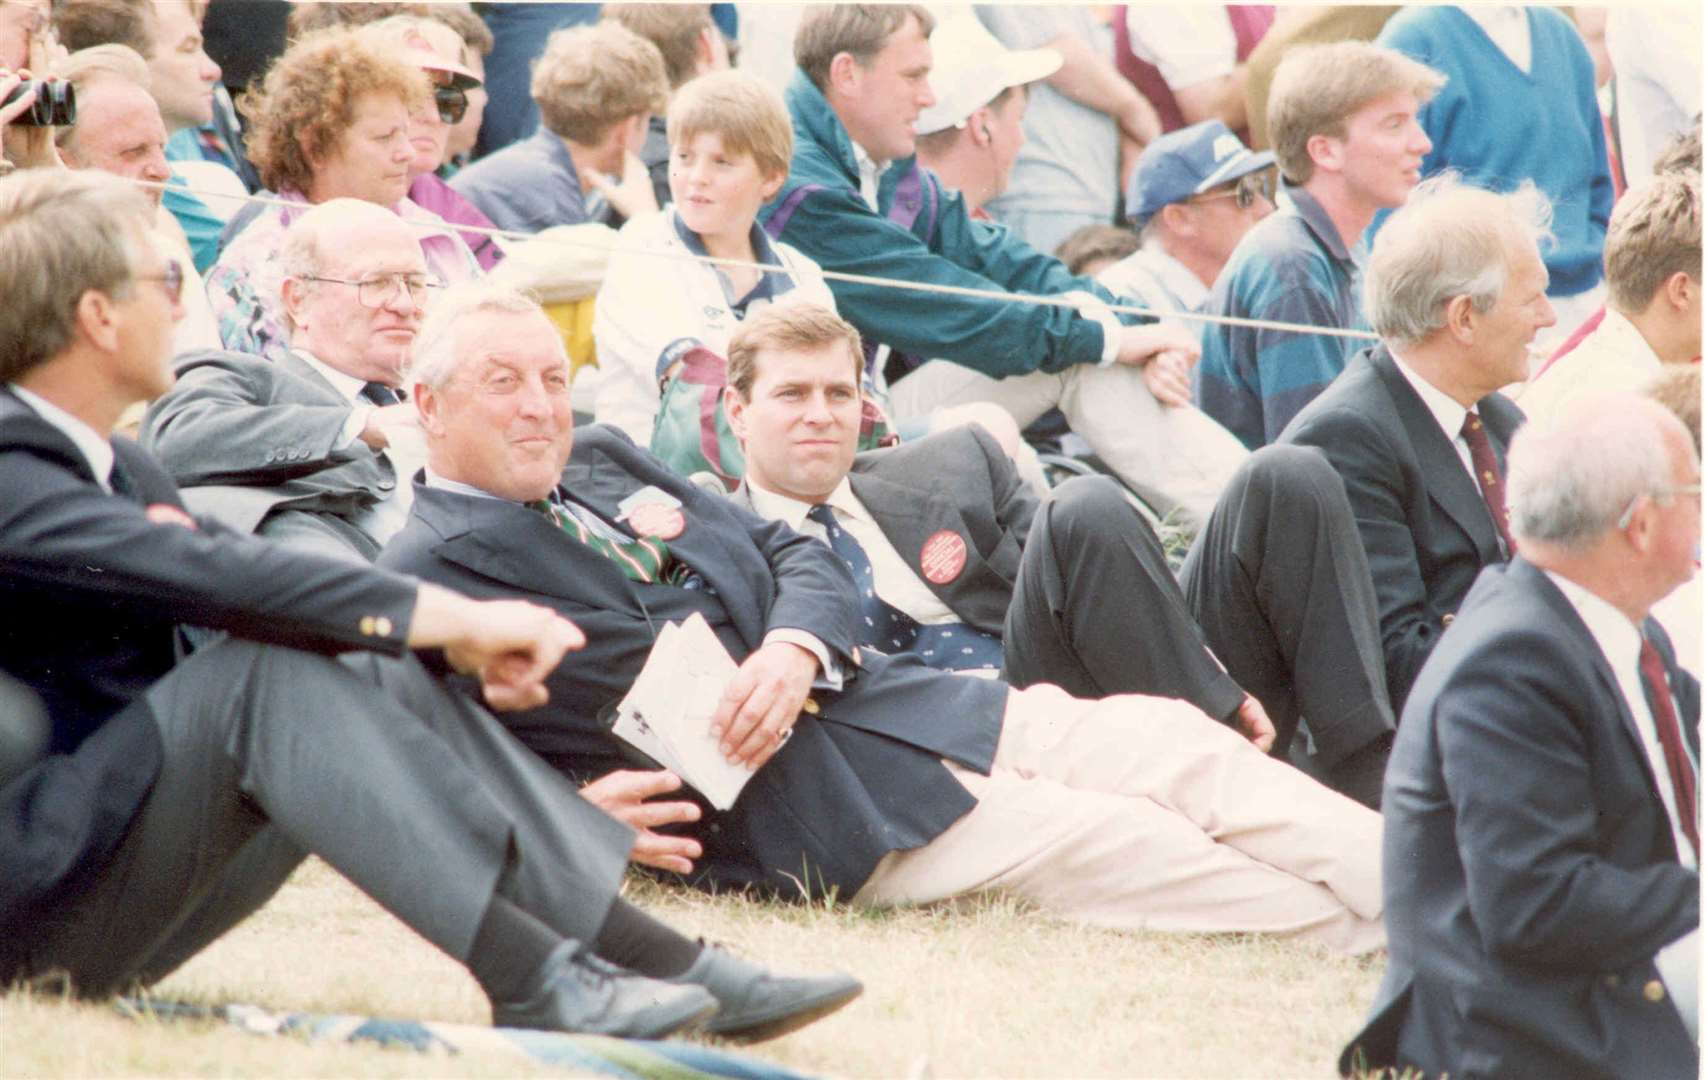 The Duke of York relaxed in the crowds watching the 1993 Open Golf Championship at Royal St George's, Sandwich, in July 1993. It was won that year by Greg Norman